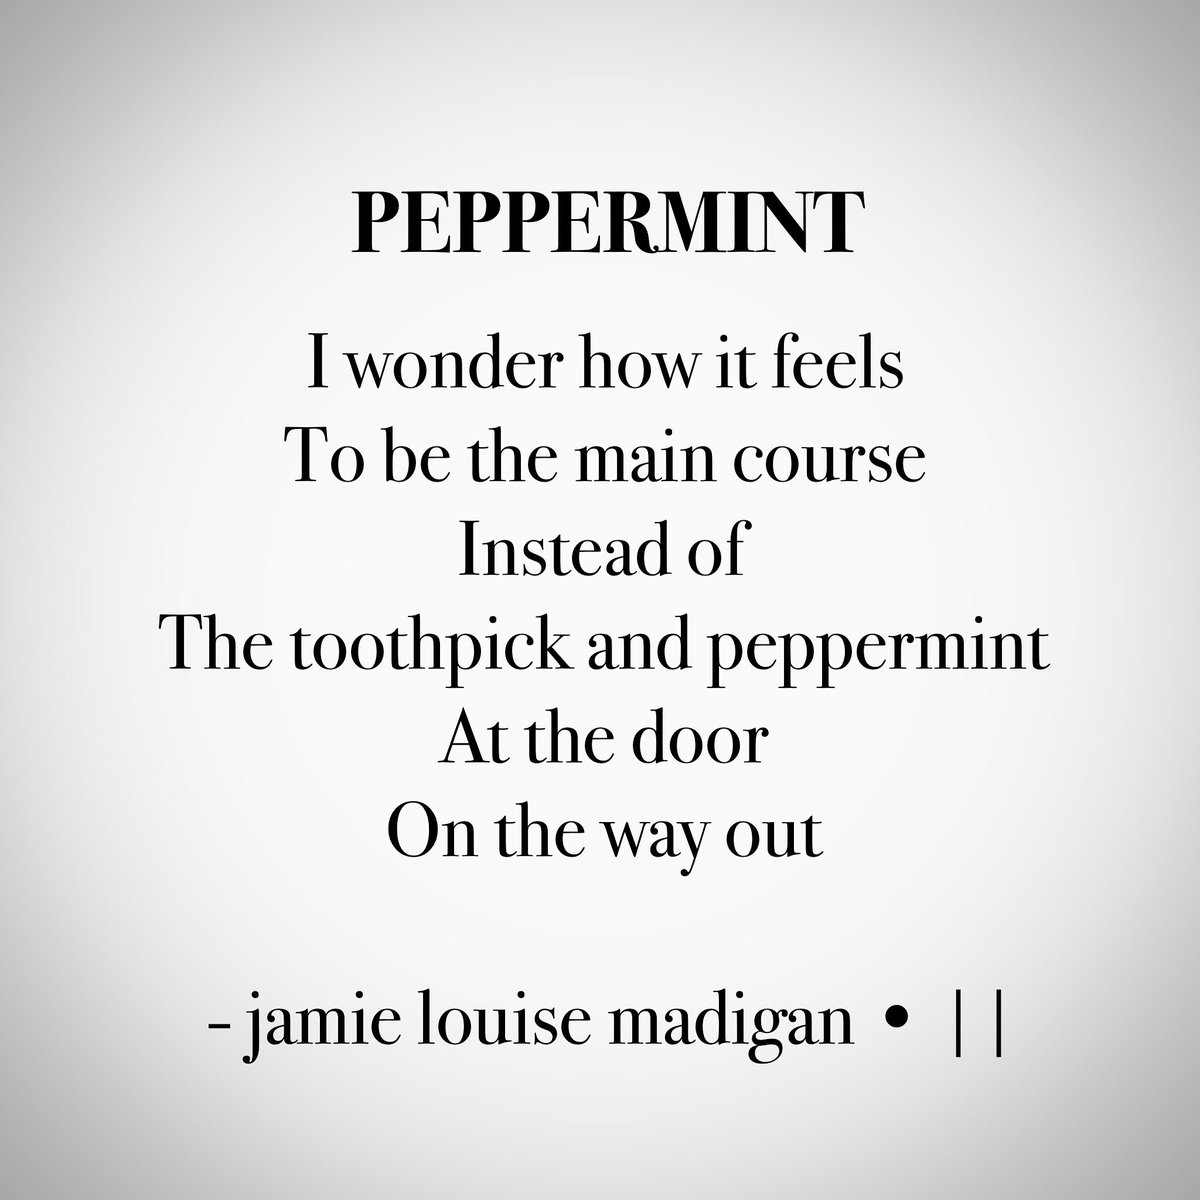 Peppermint. Lipstick Stains and Coffee Cups, Page 51. 💋☕️

#yyc #calgary #alberta #yycnow 
#poetry #poetrybook #author #authorlife 
 #healing #spilledink  #poet #writer #writing #creativewriting #poetrycommunity #localauthor #supportlocal #literarylife #writerscommunity #abuse